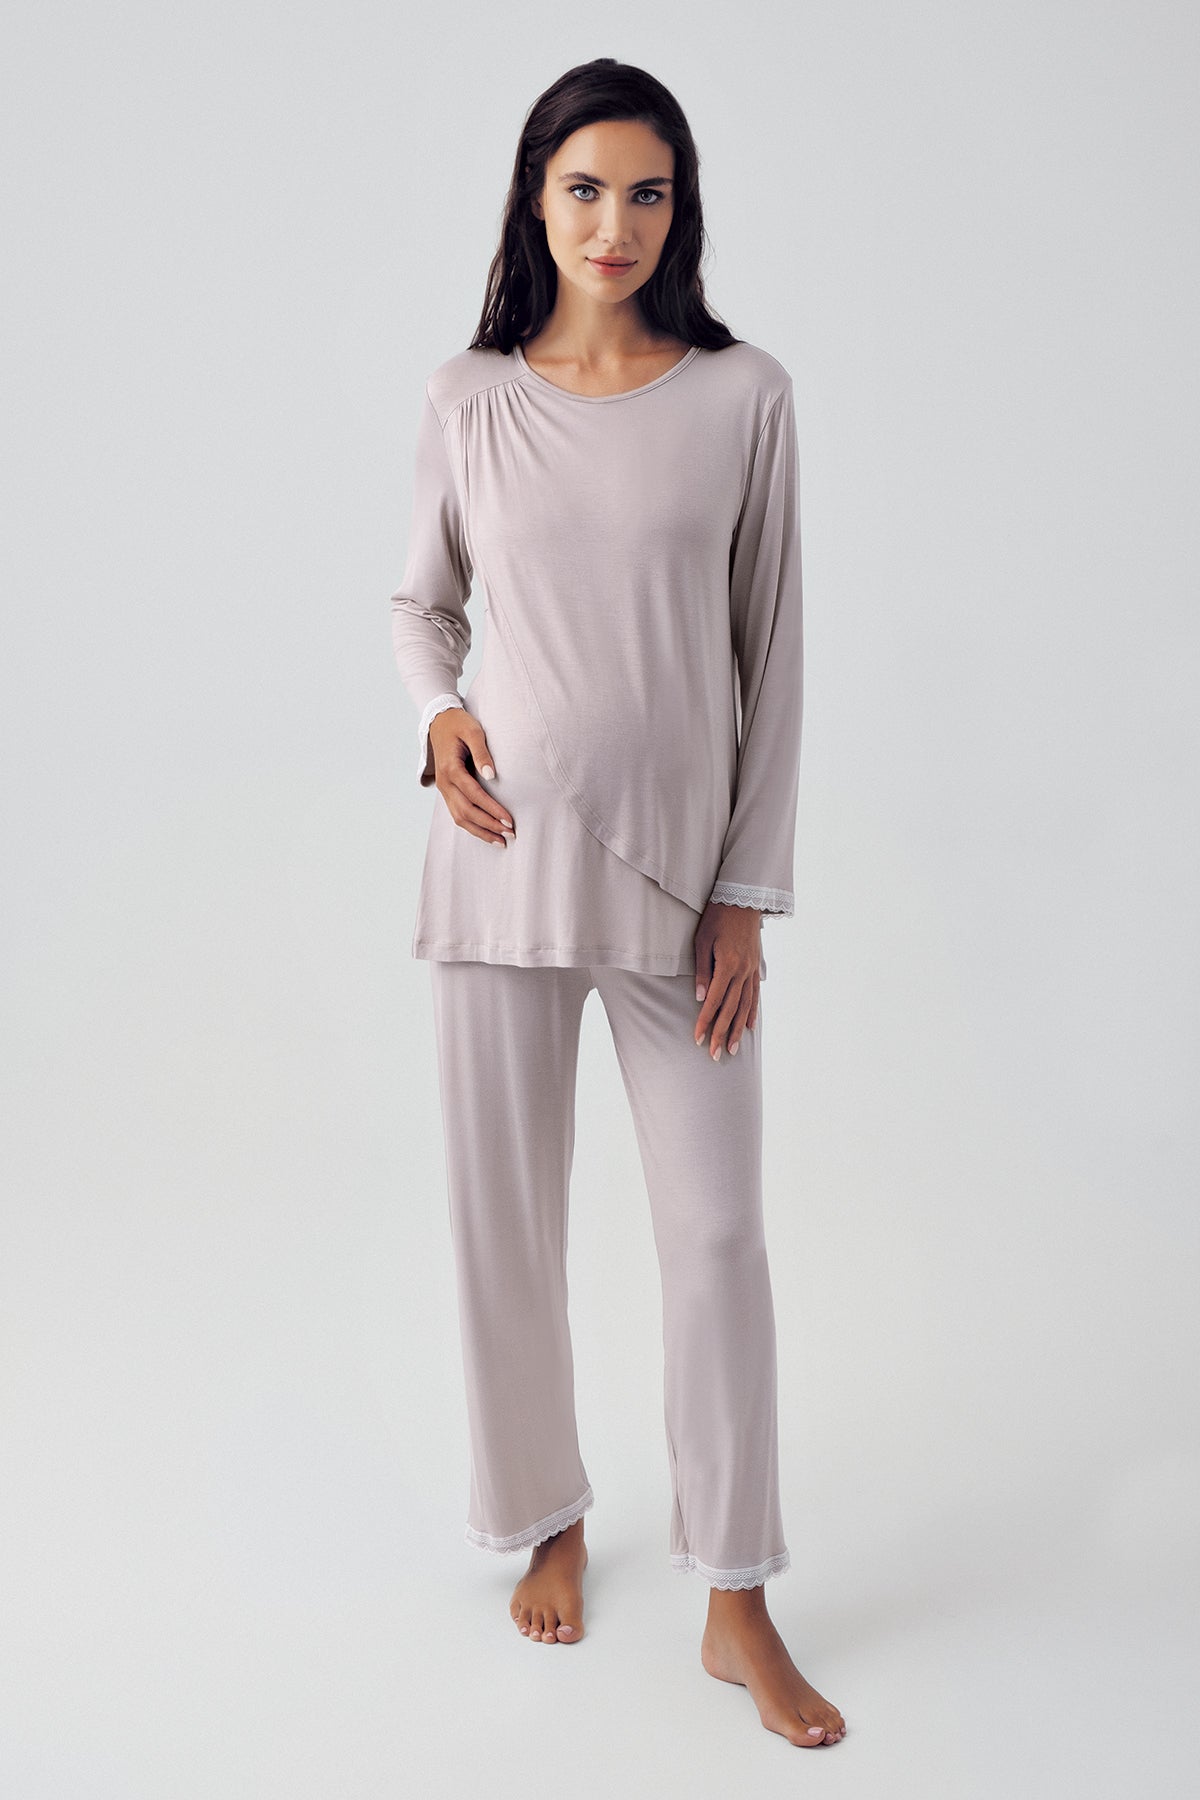 Shopymommy 15209 Wide Double Breasted Maternity & Nursing Pajamas Coffee